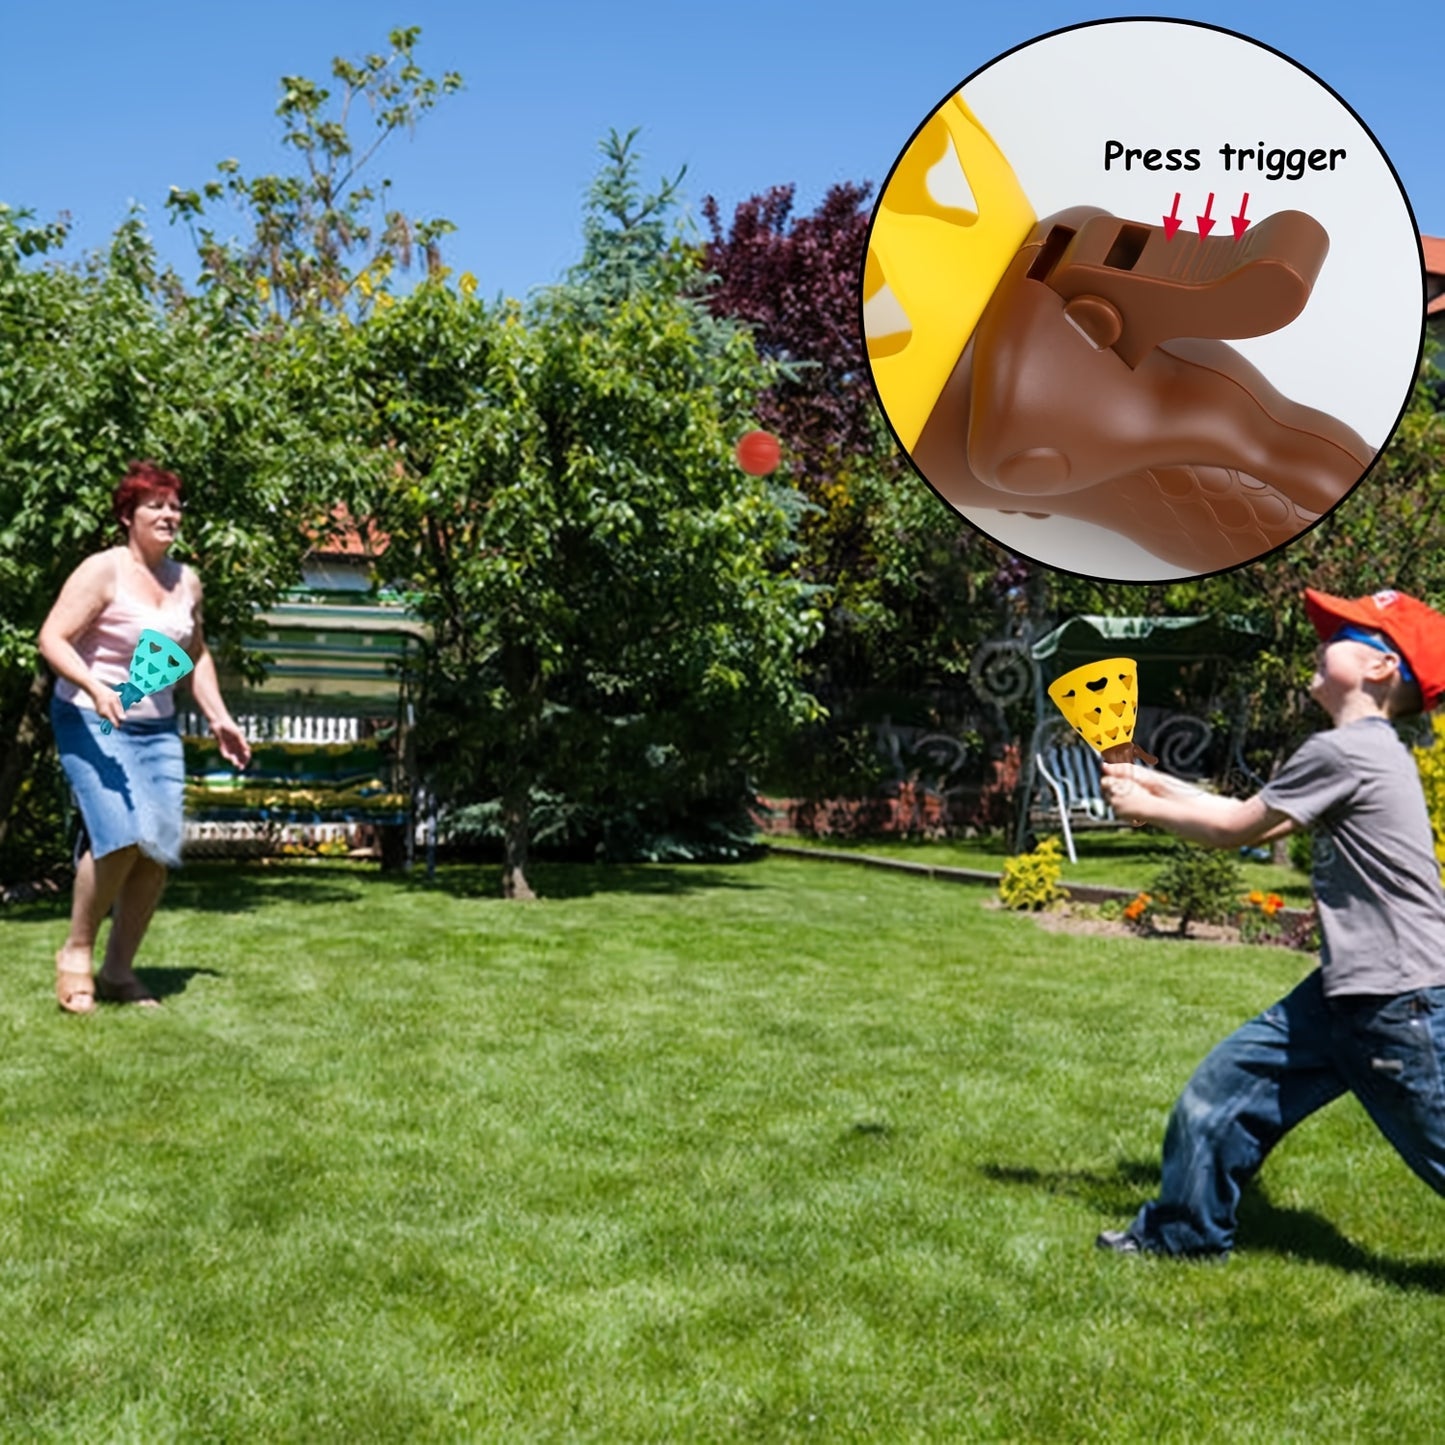 Outdoor Indoor Game Activities For Kids And Families, Pop-pass-catch Games, With 2 Catch Launcher Baskets And 6 Balls, Yard Games